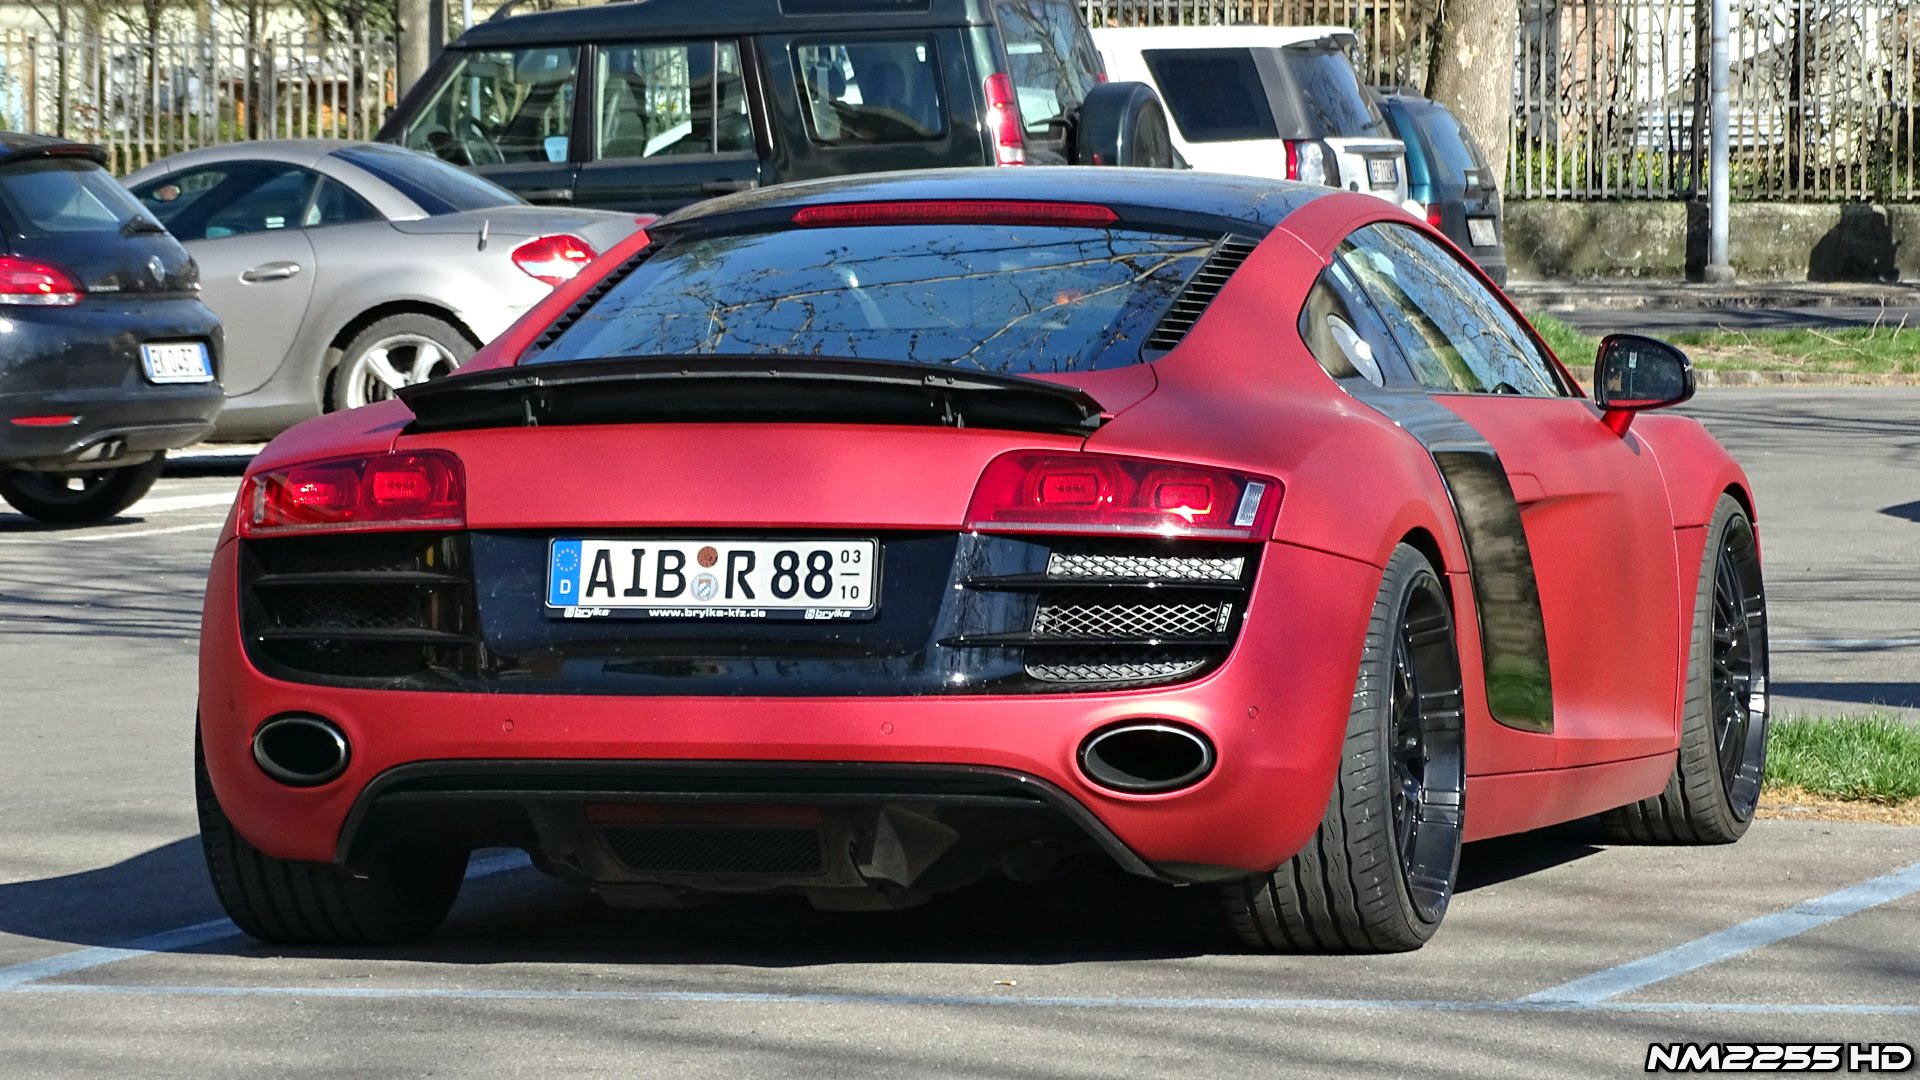 Insanely LOUD Matte Red Audi R8 V8 Start, Rev and Accelerate! - YouTube